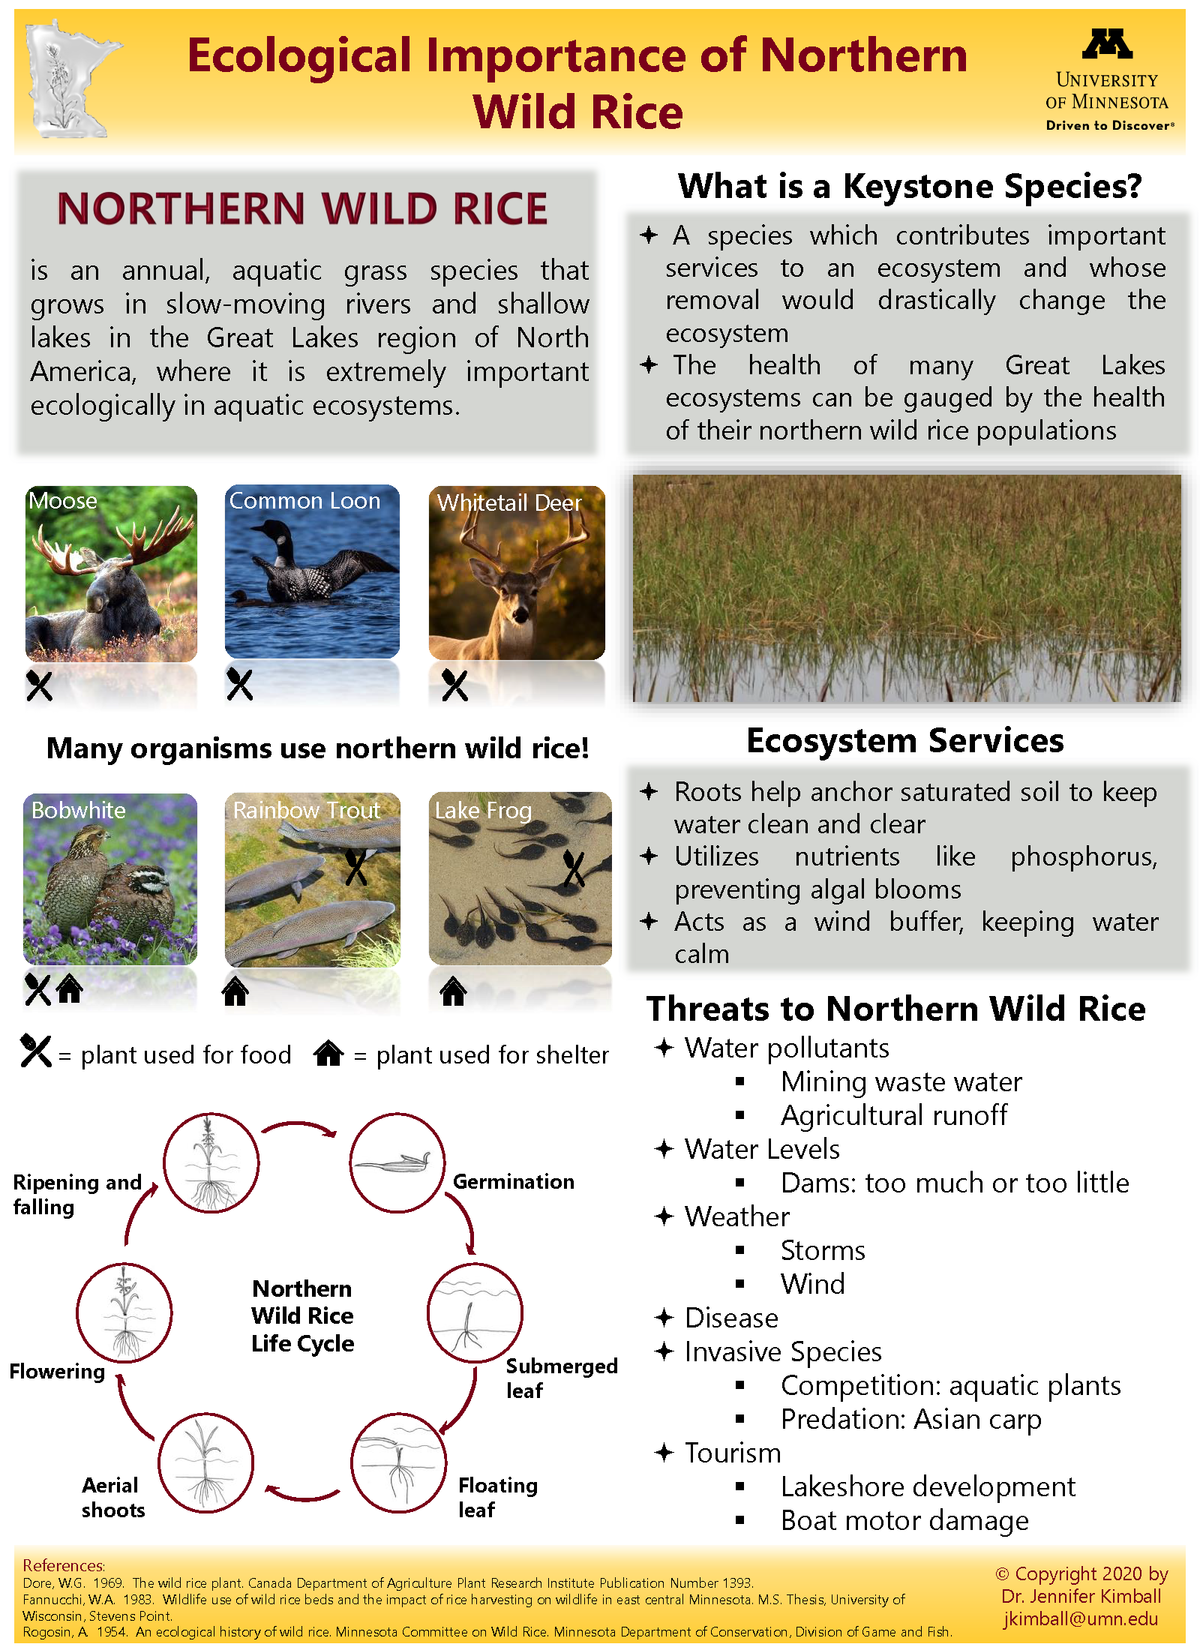 Ecological importance handout with info about keystone species, wild rice life cycle, and threats to wild rice